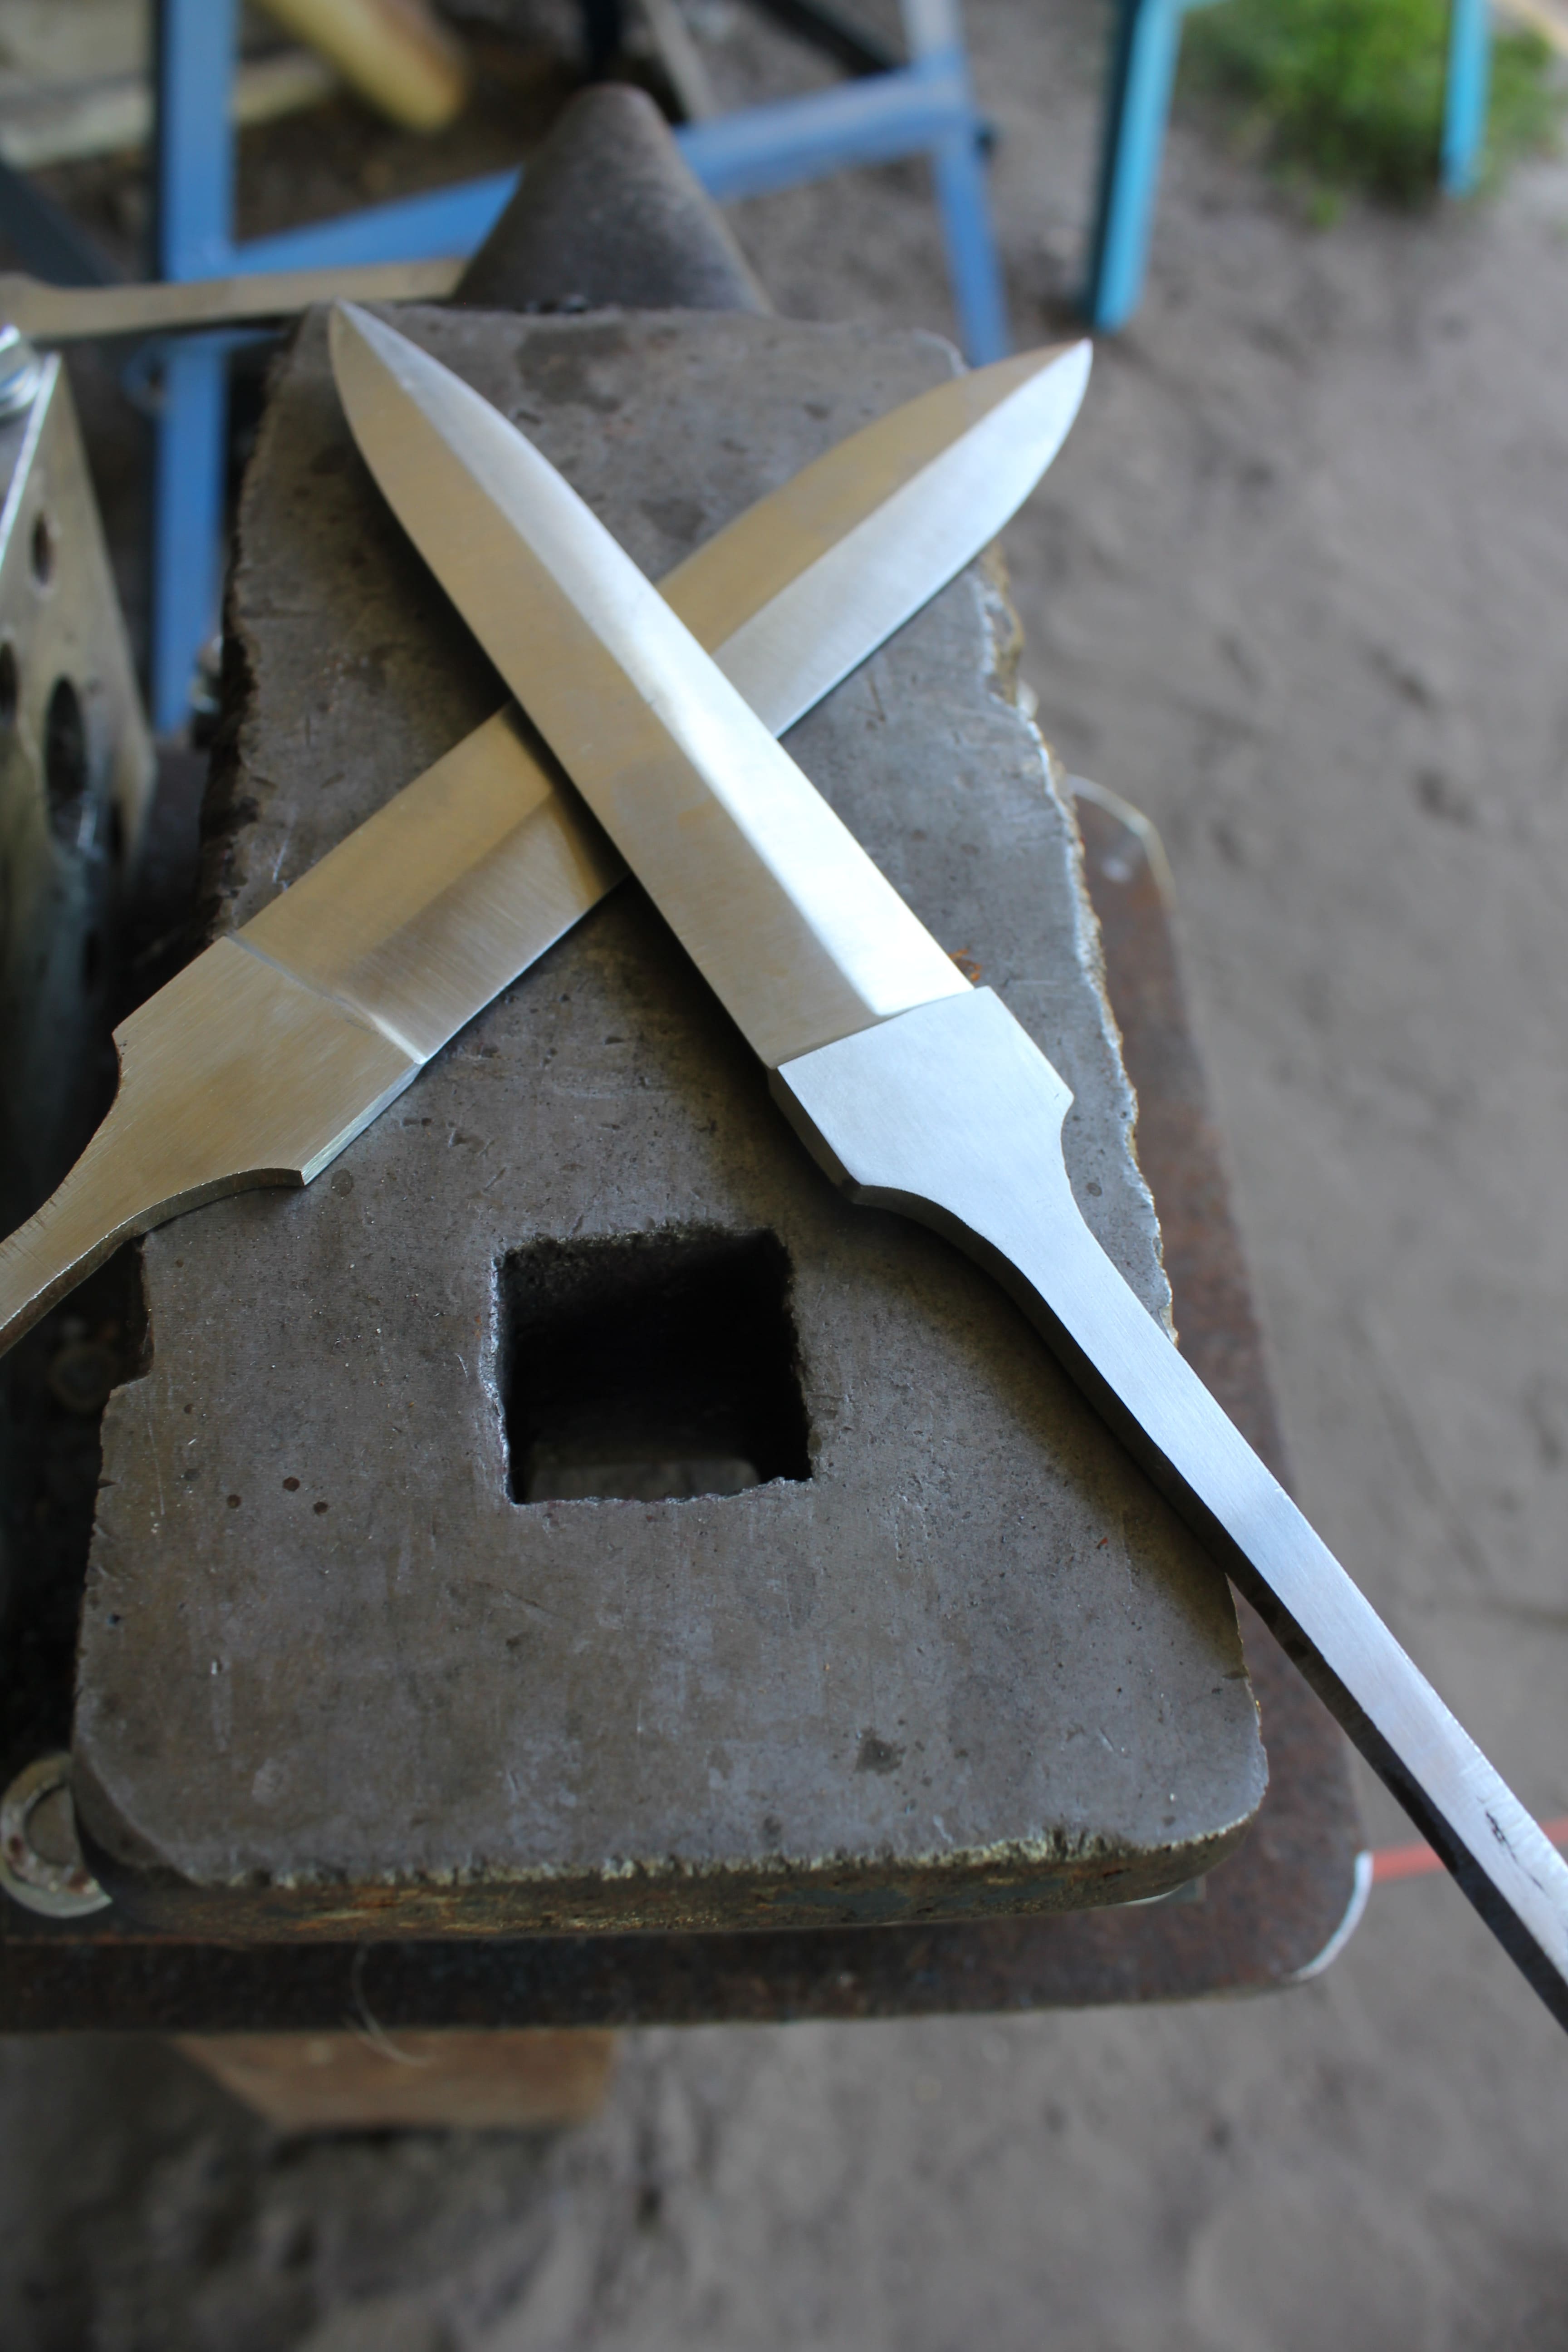 A pair of unfinished daggers.